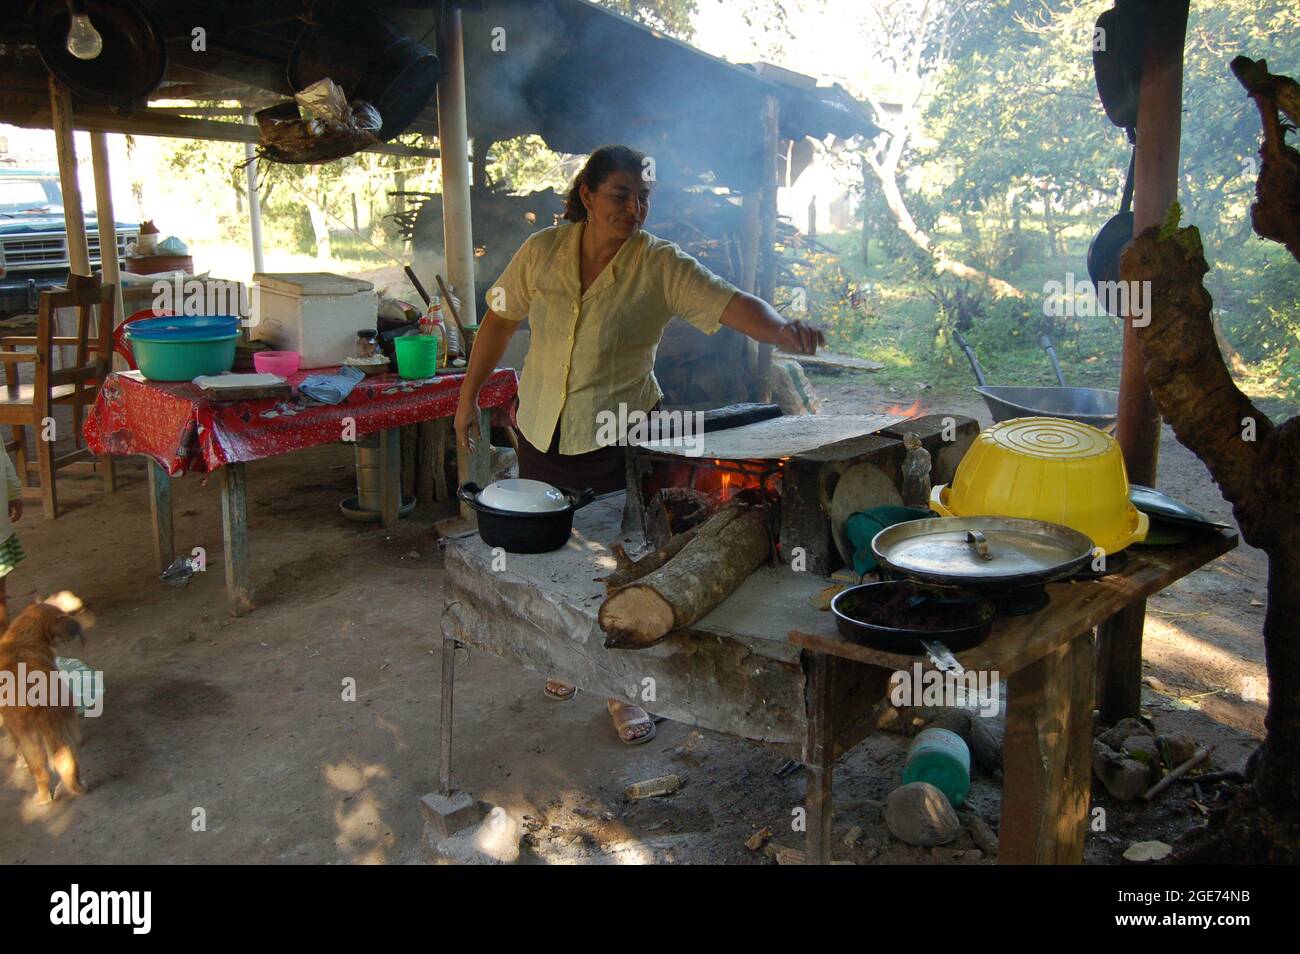 https://c8.alamy.com/comp/2GE74NB/a-woman-cooking-tortillas-on-a-comal-a-traditional-way-to-prepare-food-2GE74NB.jpg